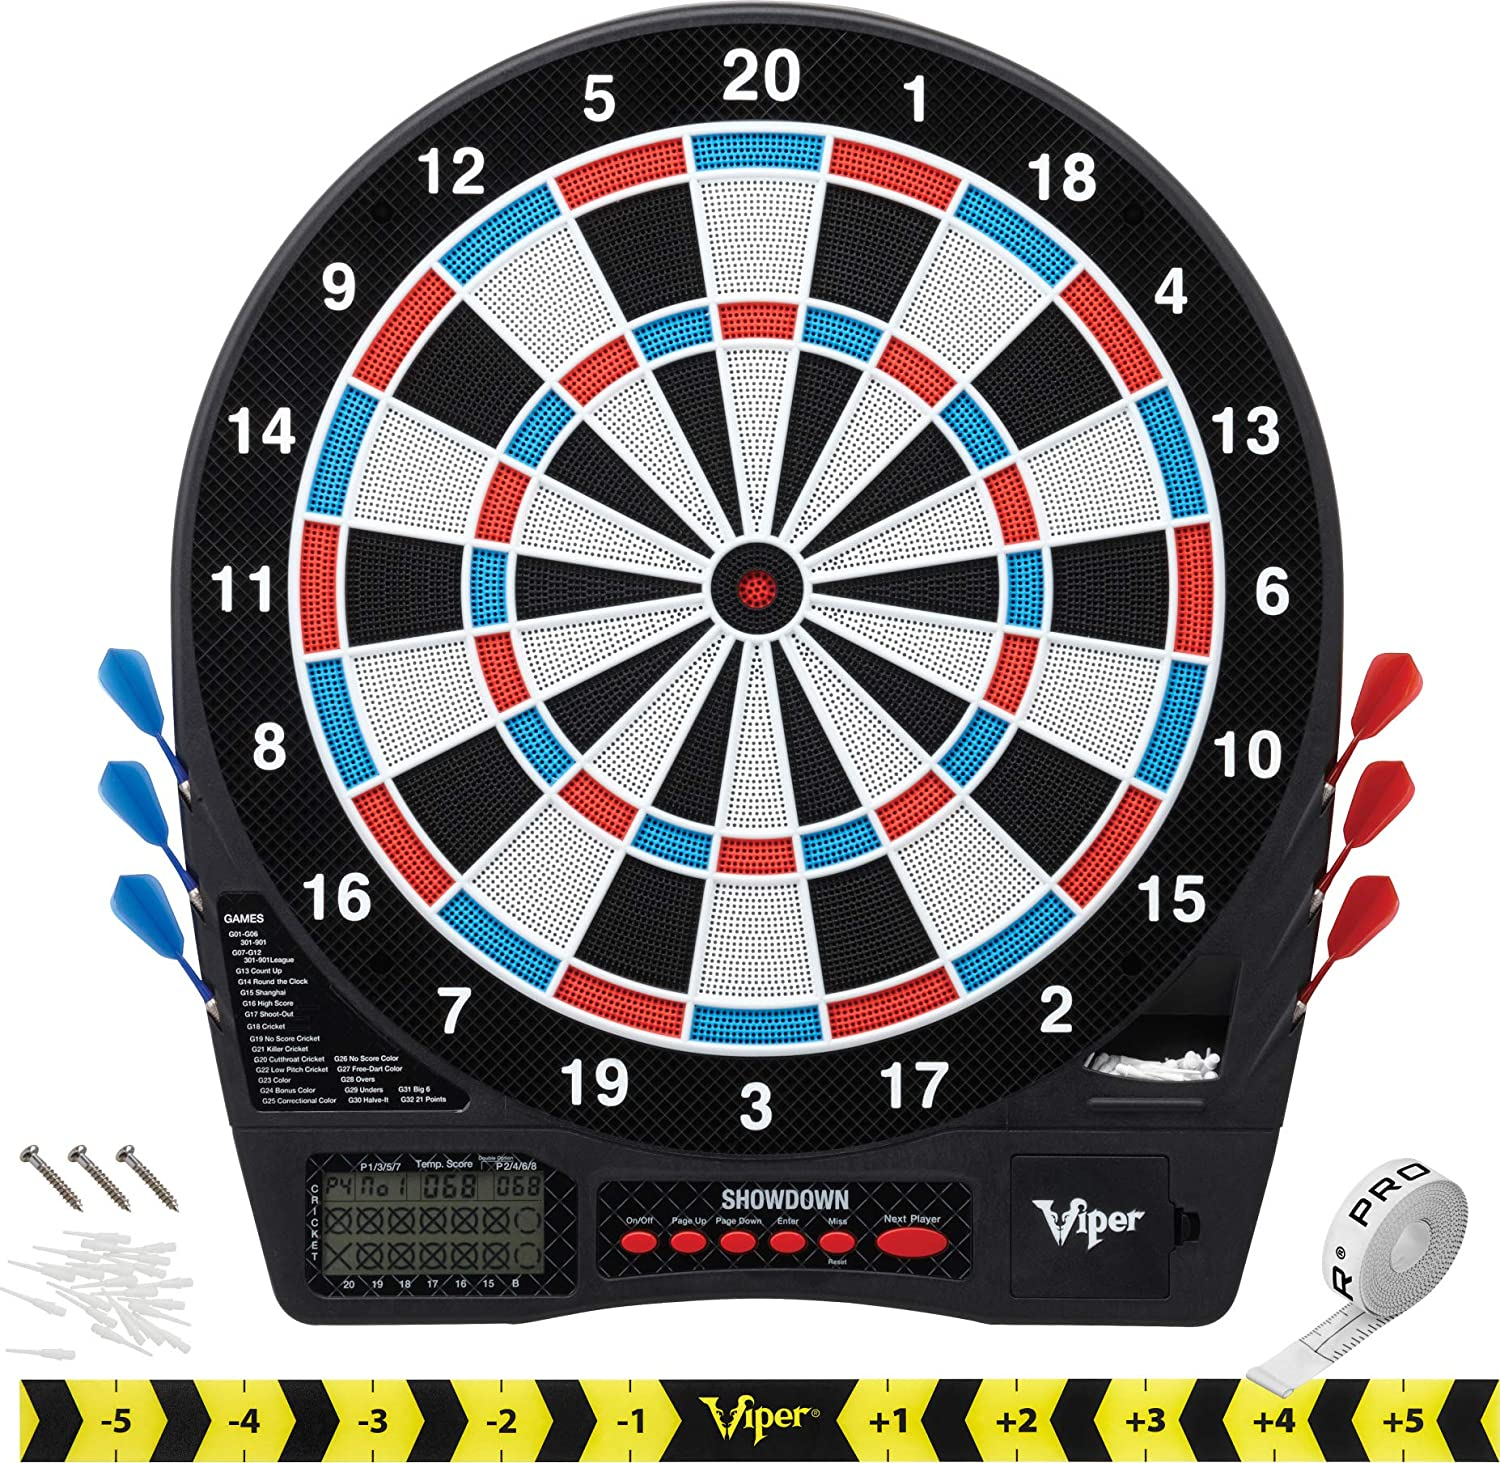 Viper Showdown Electronic Dartboard - Sport Size (Over 30 Games with 590 Options, Automatic Scoring LCD Display, Missed-Dart Catch Band) $42.50